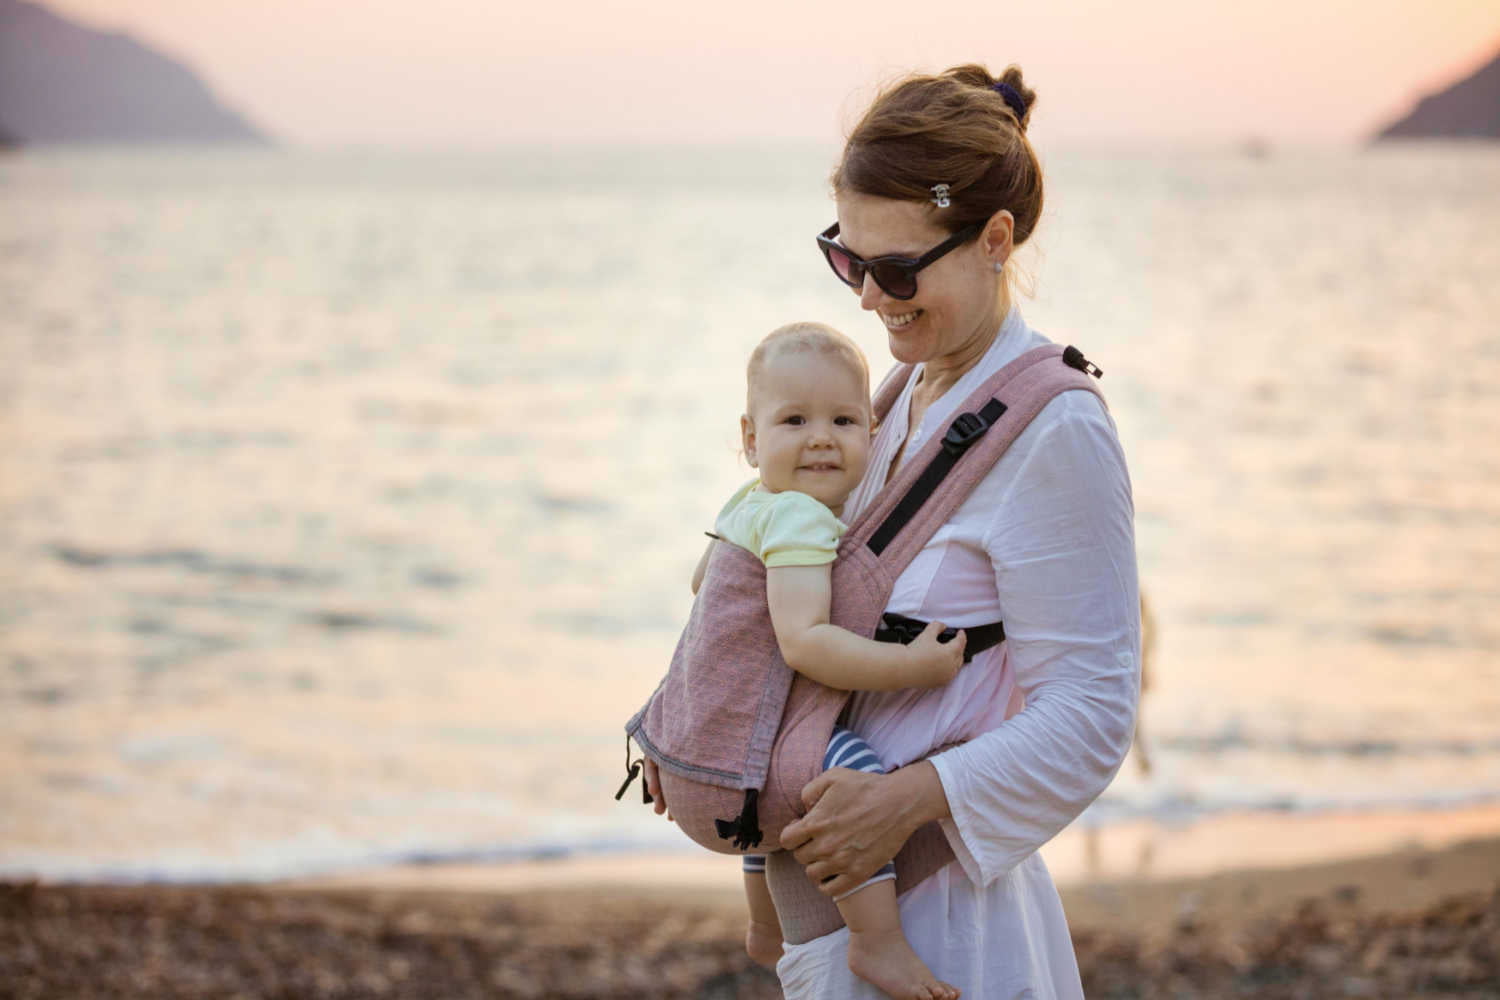 Choose the Right Baby Carriers